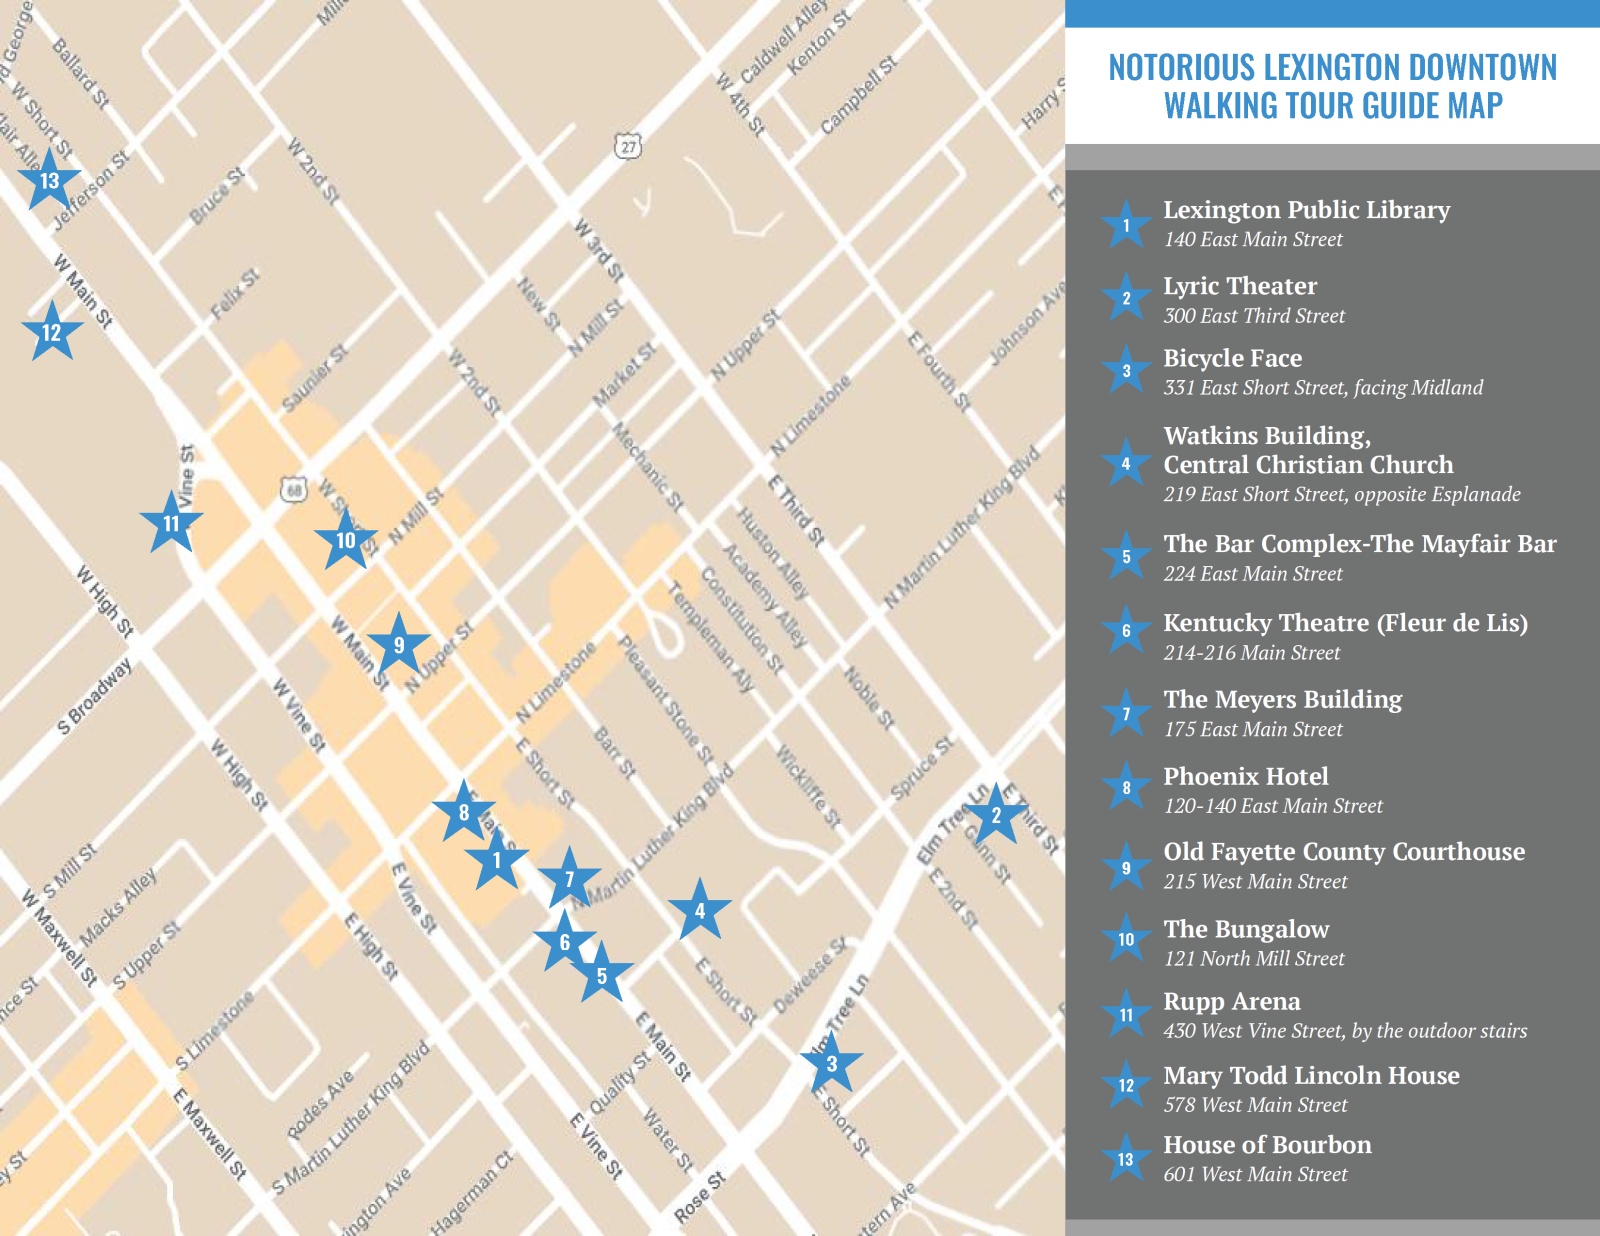 Map of downtown Lexington with thirteen (13) blue stars noting the locations of the tour stops.